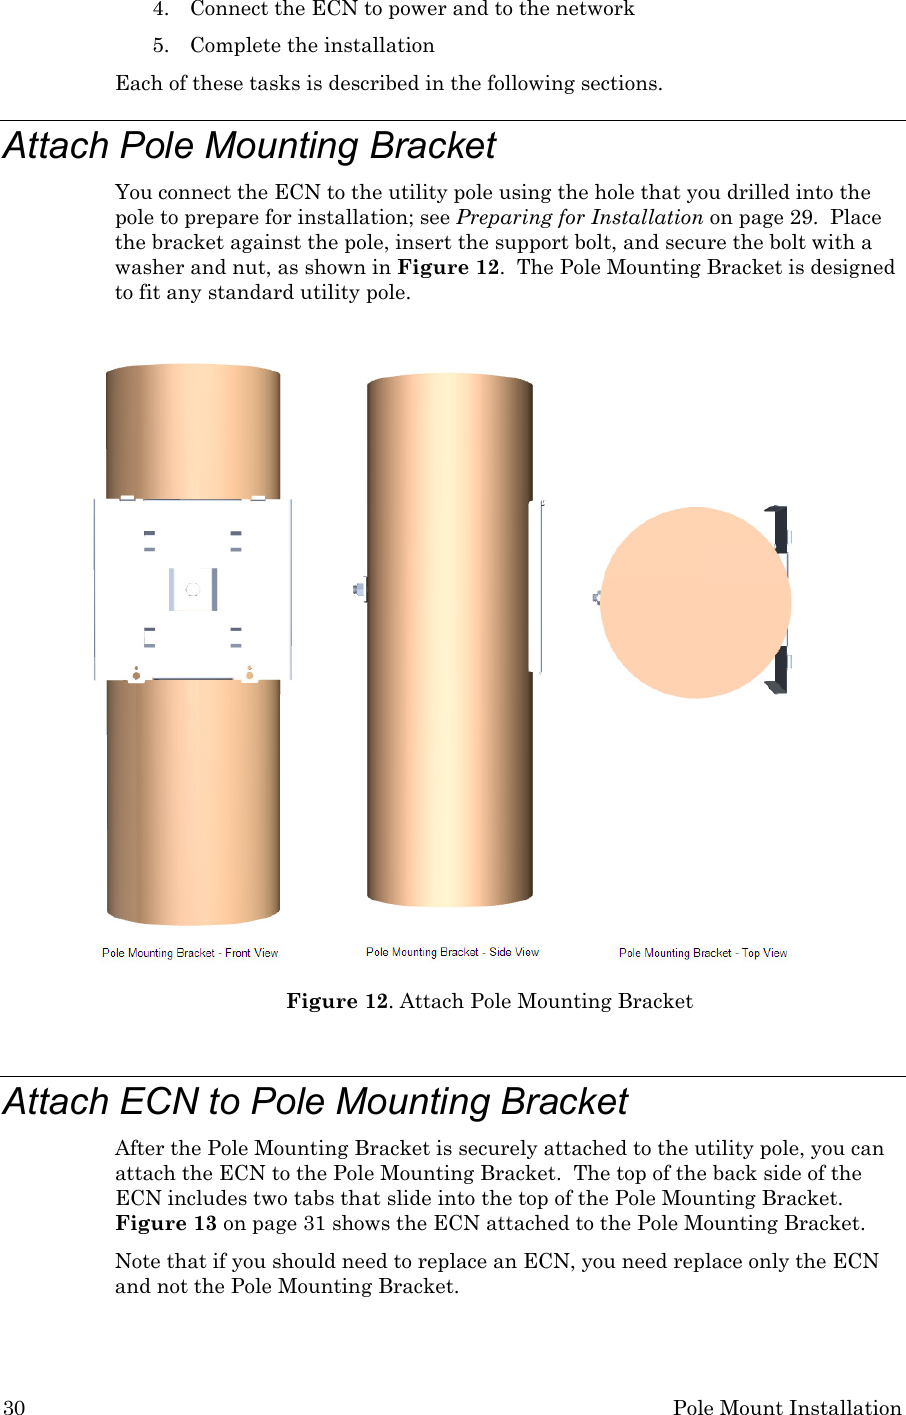 30 Pole Mount Installation 4. Connect the ECN to power and to the network 5. Complete the installation Each of these tasks is described in the following sections. Attach Pole Mounting Bracket You connect the ECN to the utility pole using the hole that you drilled into the pole to prepare for installation; see Preparing for Installation on page 29.  Place the bracket against the pole, insert the support bolt, and secure the bolt with a washer and nut, as shown in Figure 12.  The Pole Mounting Bracket is designed to fit any standard utility pole.   Figure 12. Attach Pole Mounting Bracket  Attach ECN to Pole Mounting Bracket After the Pole Mounting Bracket is securely attached to the utility pole, you can attach the ECN to the Pole Mounting Bracket.  The top of the back side of the ECN includes two tabs that slide into the top of the Pole Mounting Bracket.  Figure 13 on page 31 shows the ECN attached to the Pole Mounting Bracket. Note that if you should need to replace an ECN, you need replace only the ECN and not the Pole Mounting Bracket.  